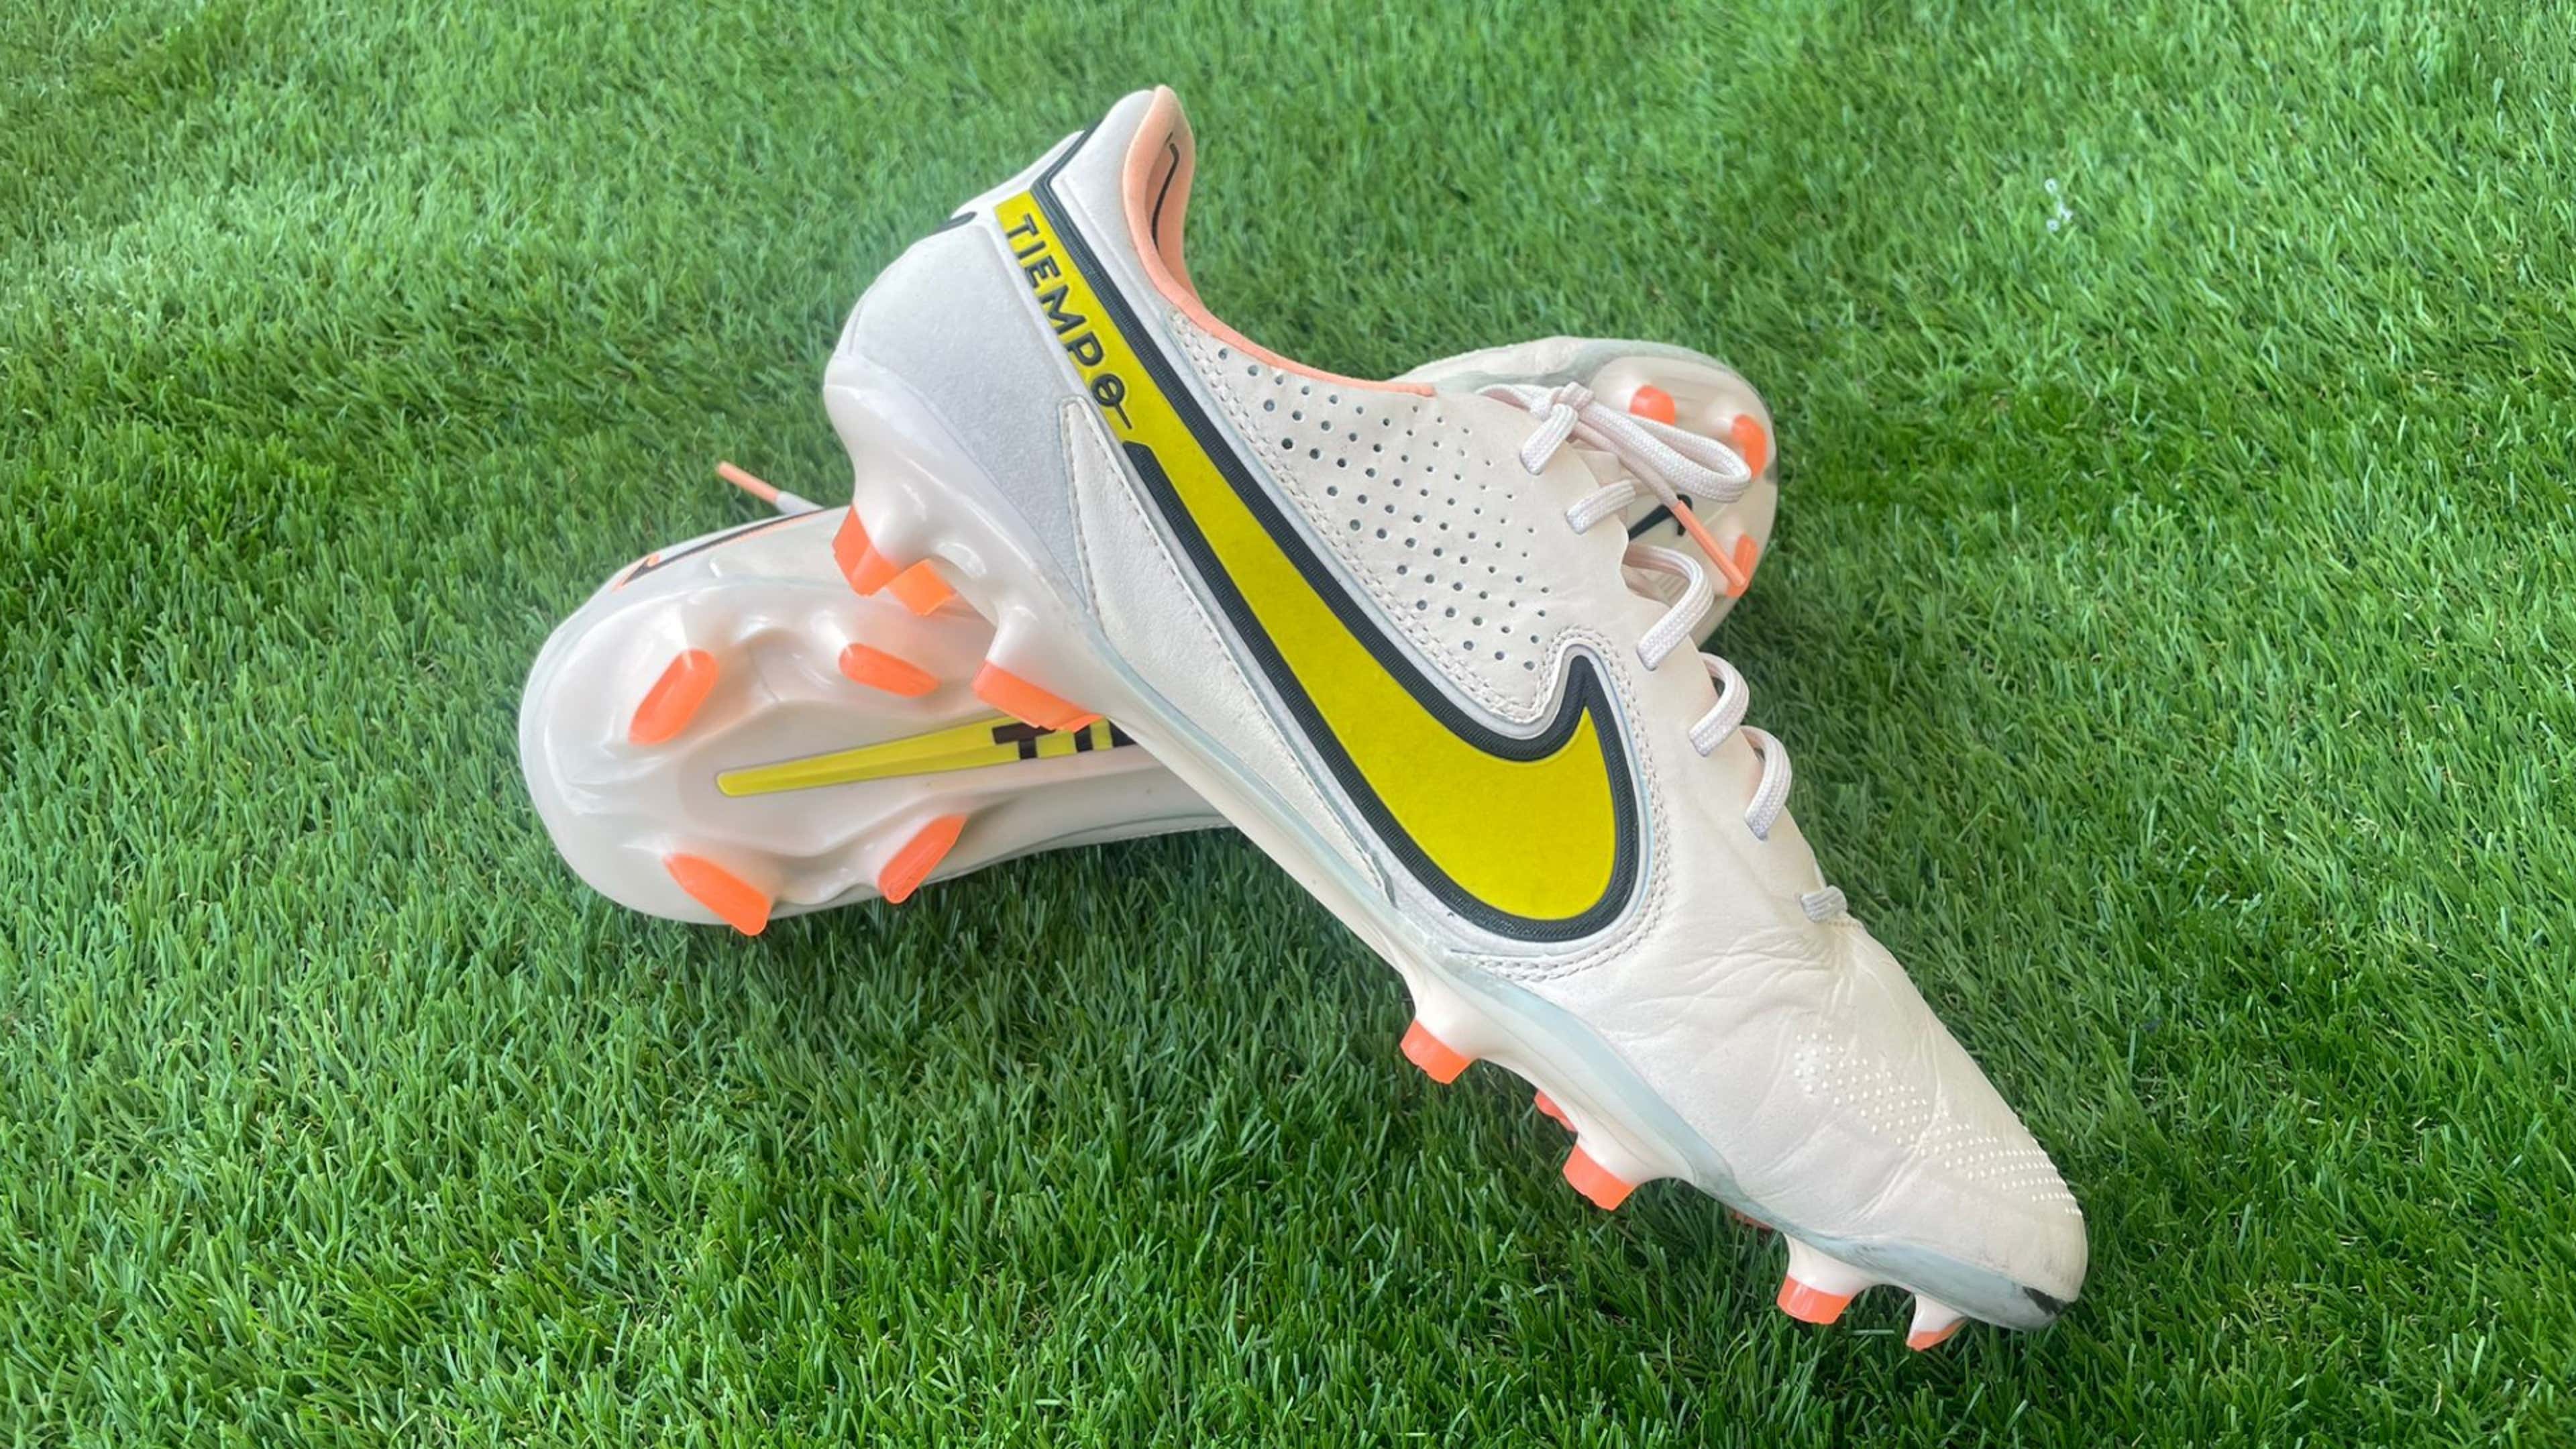 Nike Tiempo Elite Boots: Our tried & tested review | US